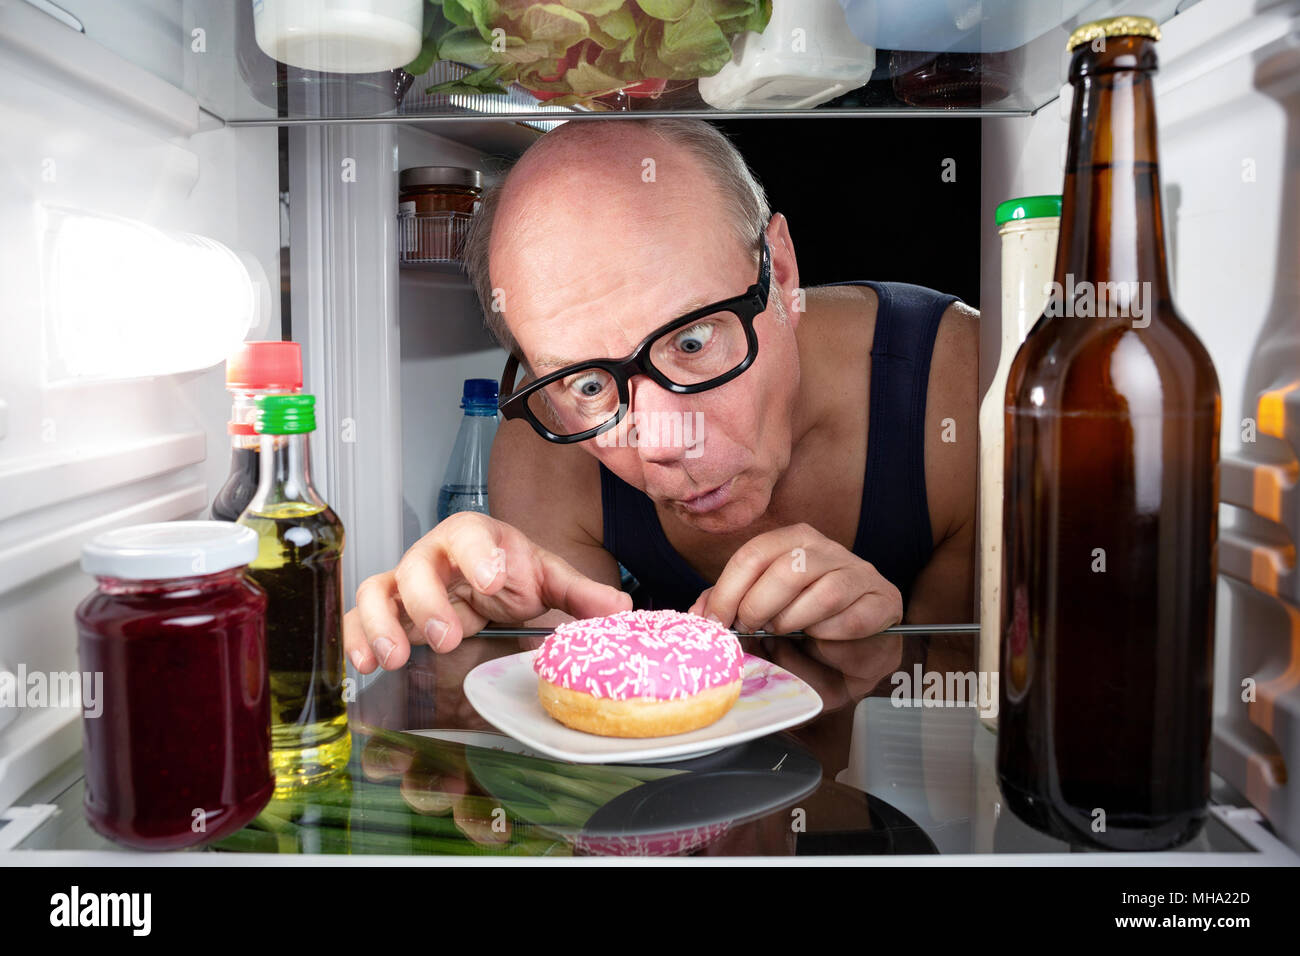 Man discovering a donut in the fridge Stock Photo